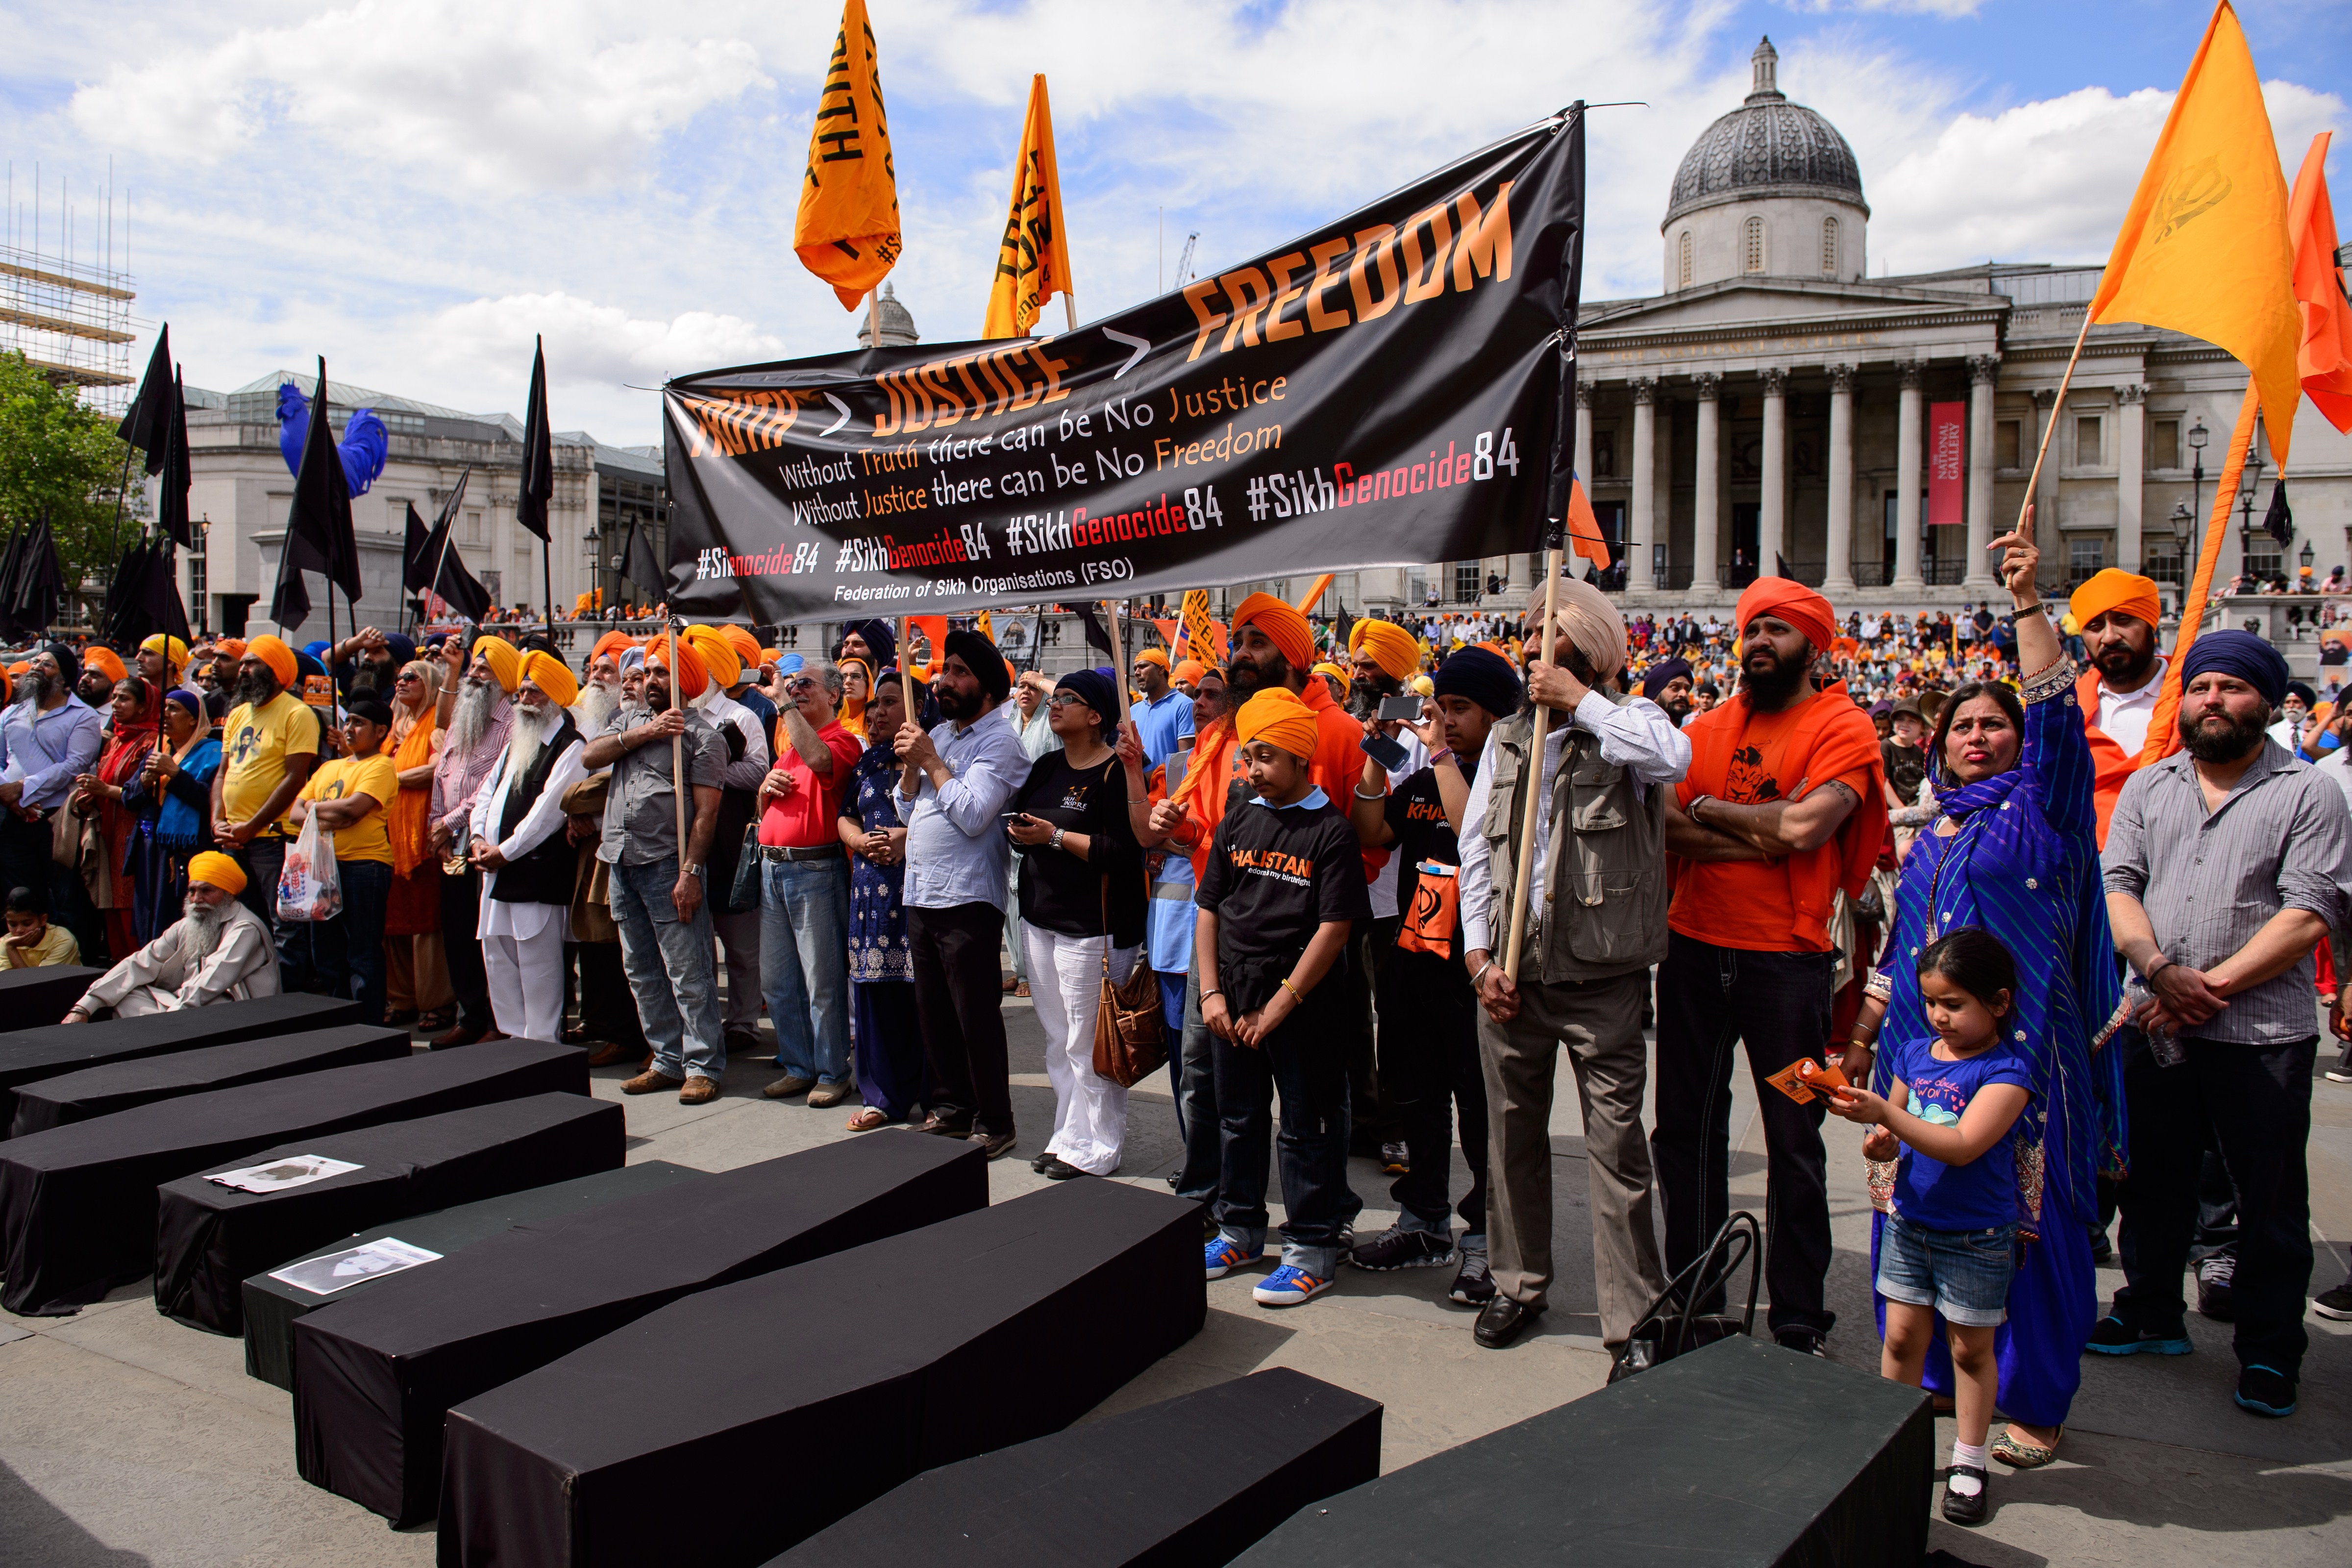 Members of the Sikh community hold aloft a banner calling for the 1984 storming of Sikhism's holiest shrine, the Golden Temple in Amritsar, by Indian troops, to be recognised as genocide as they join a demonstration in central London on June 8, 2014, to mark the 30th anniversary of the assault known as Operation Blue Star. (LEON NEAL&mdash;AFP/Getty Images)